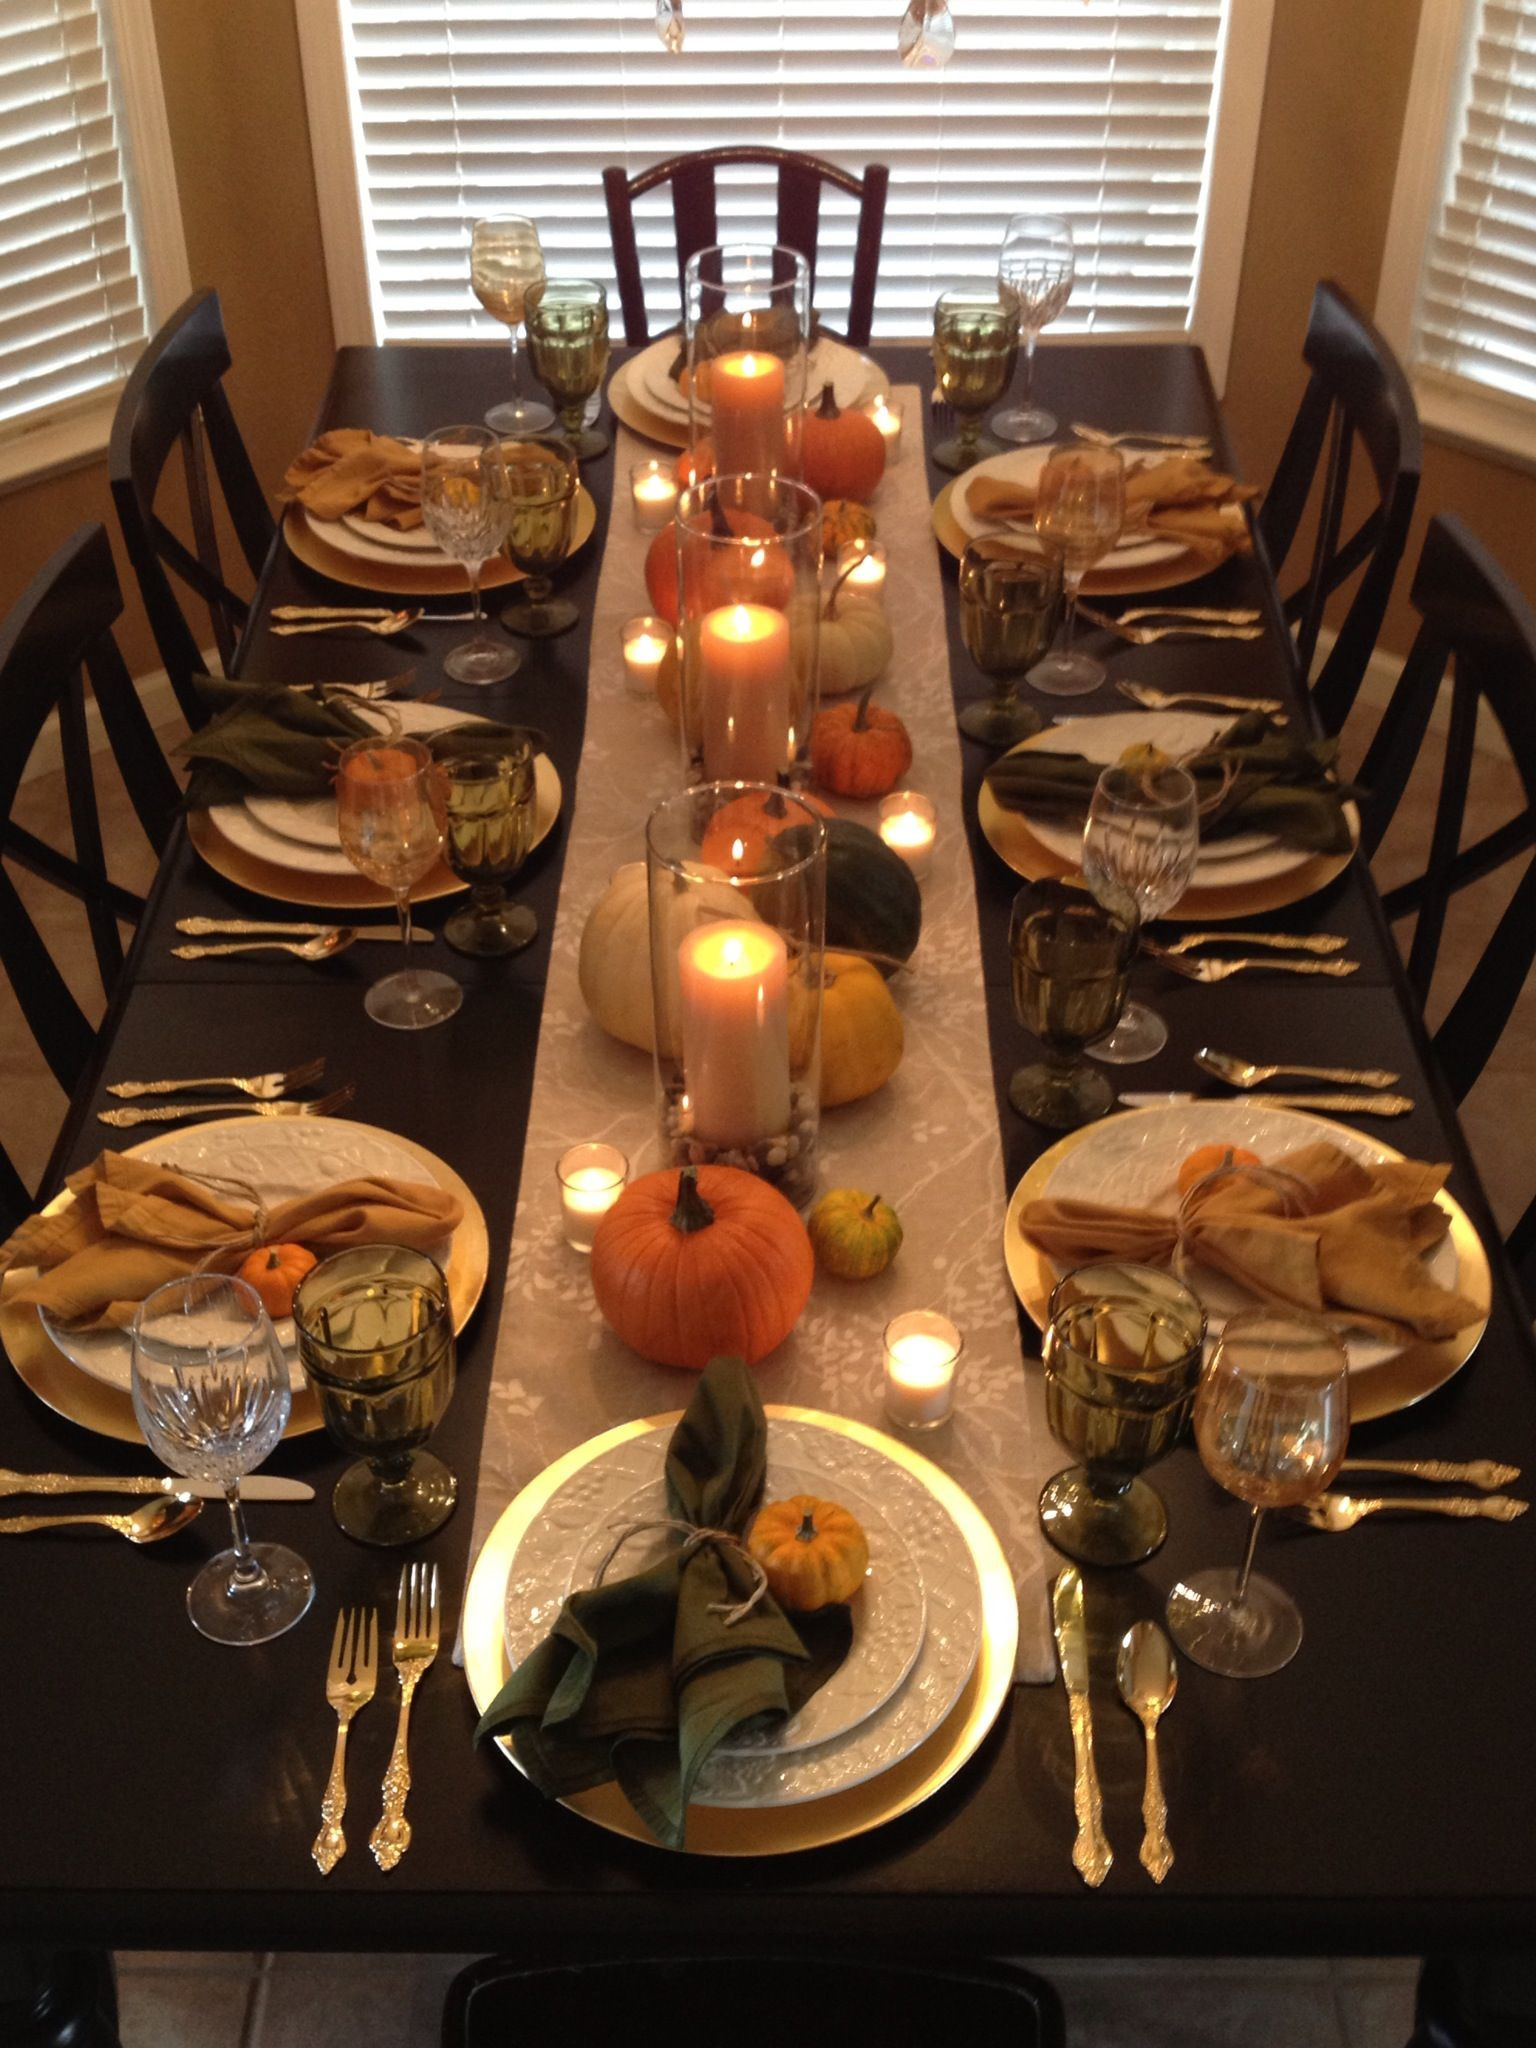 Thanksgiving Table Decorations Pinterest
 My own Thanksgiving table this year using Pinterest as my